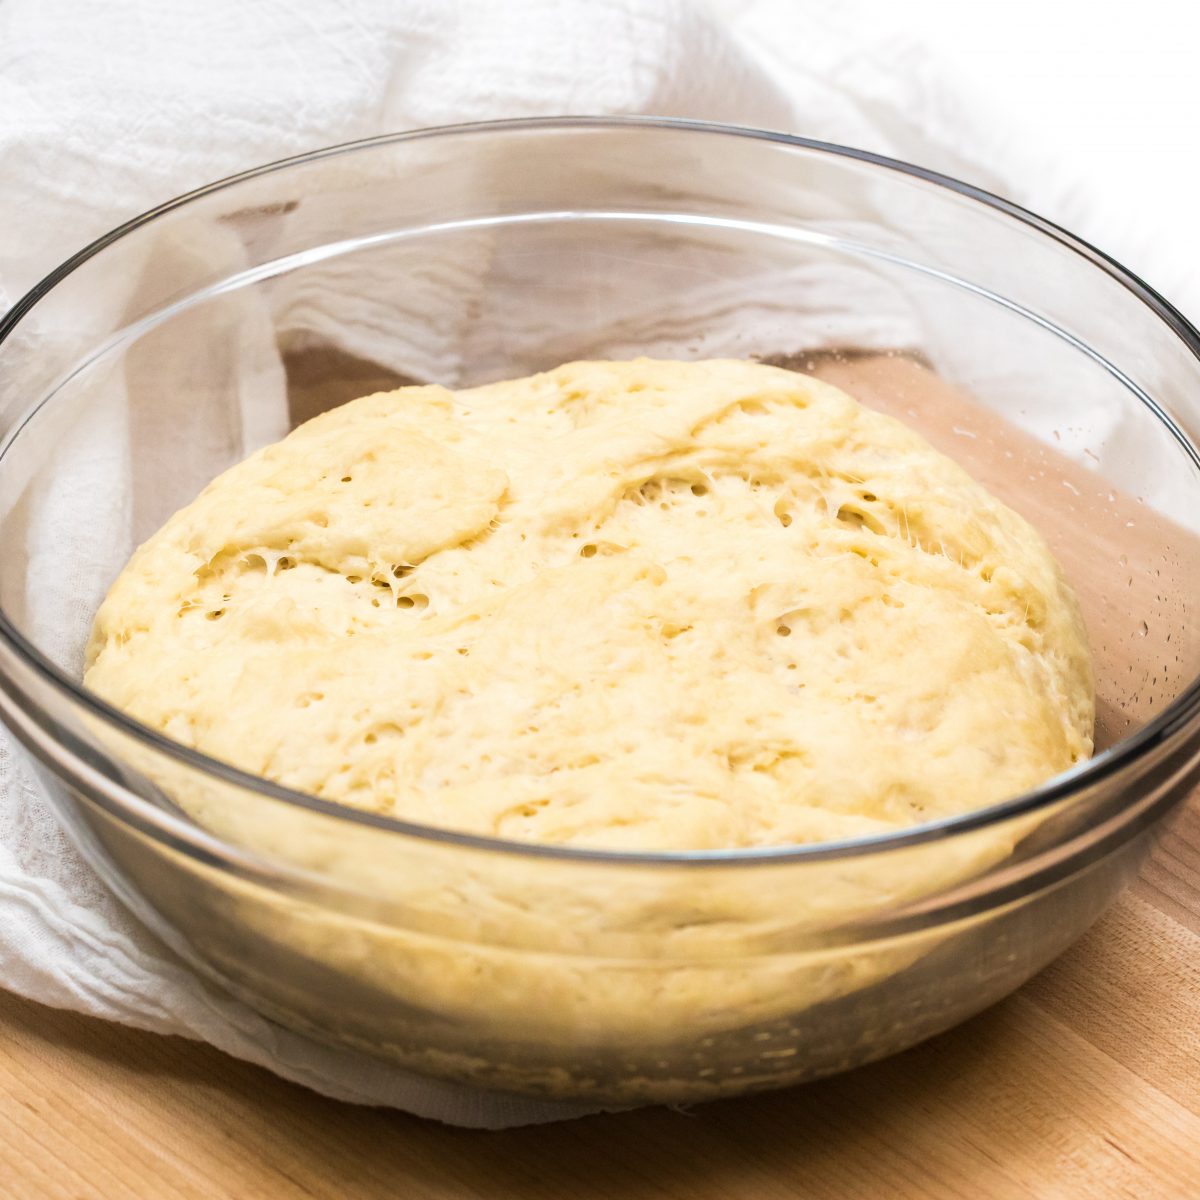 Cover dough with a towel and let sit until dough doubles in size